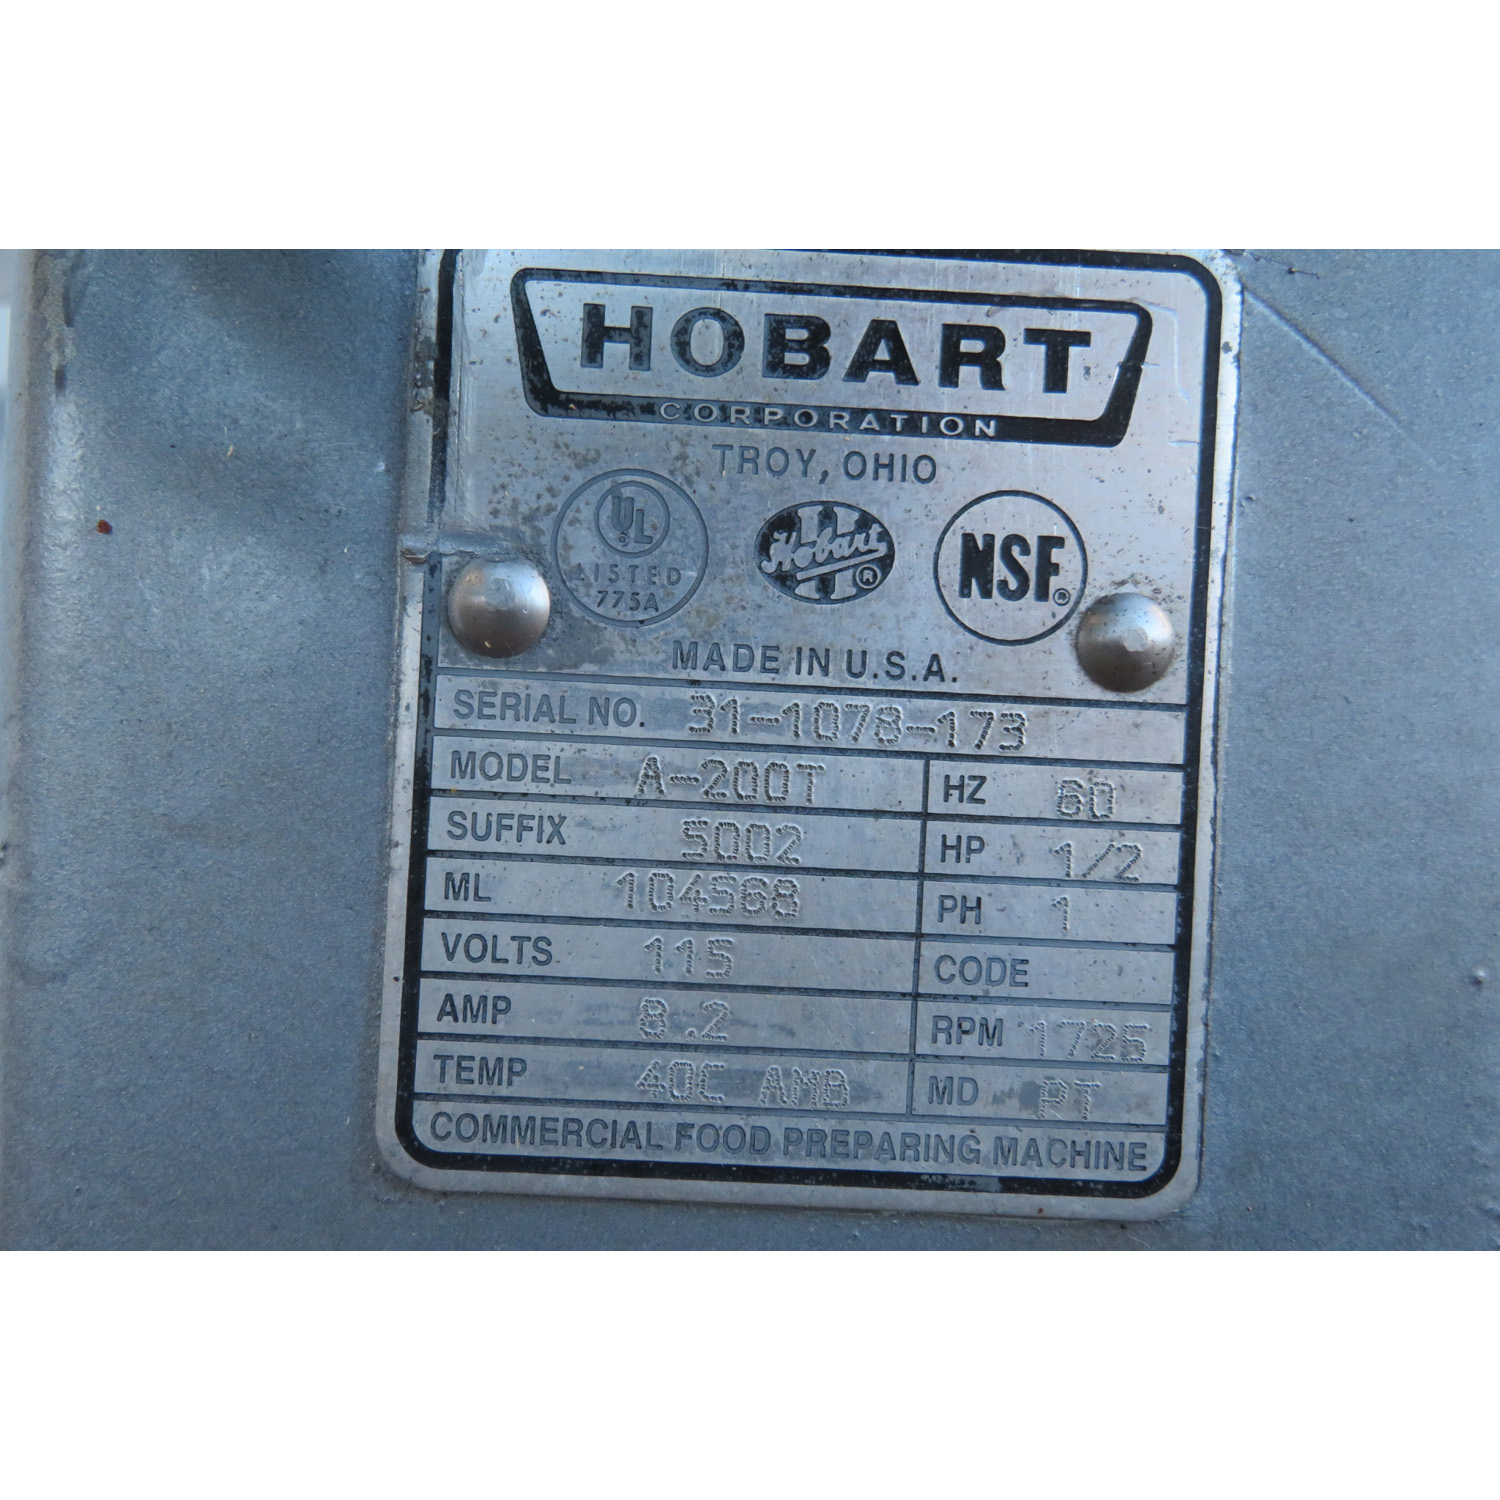 Hobart 20 Quart A200T Mixer with Guard, Used Great Condition image 3